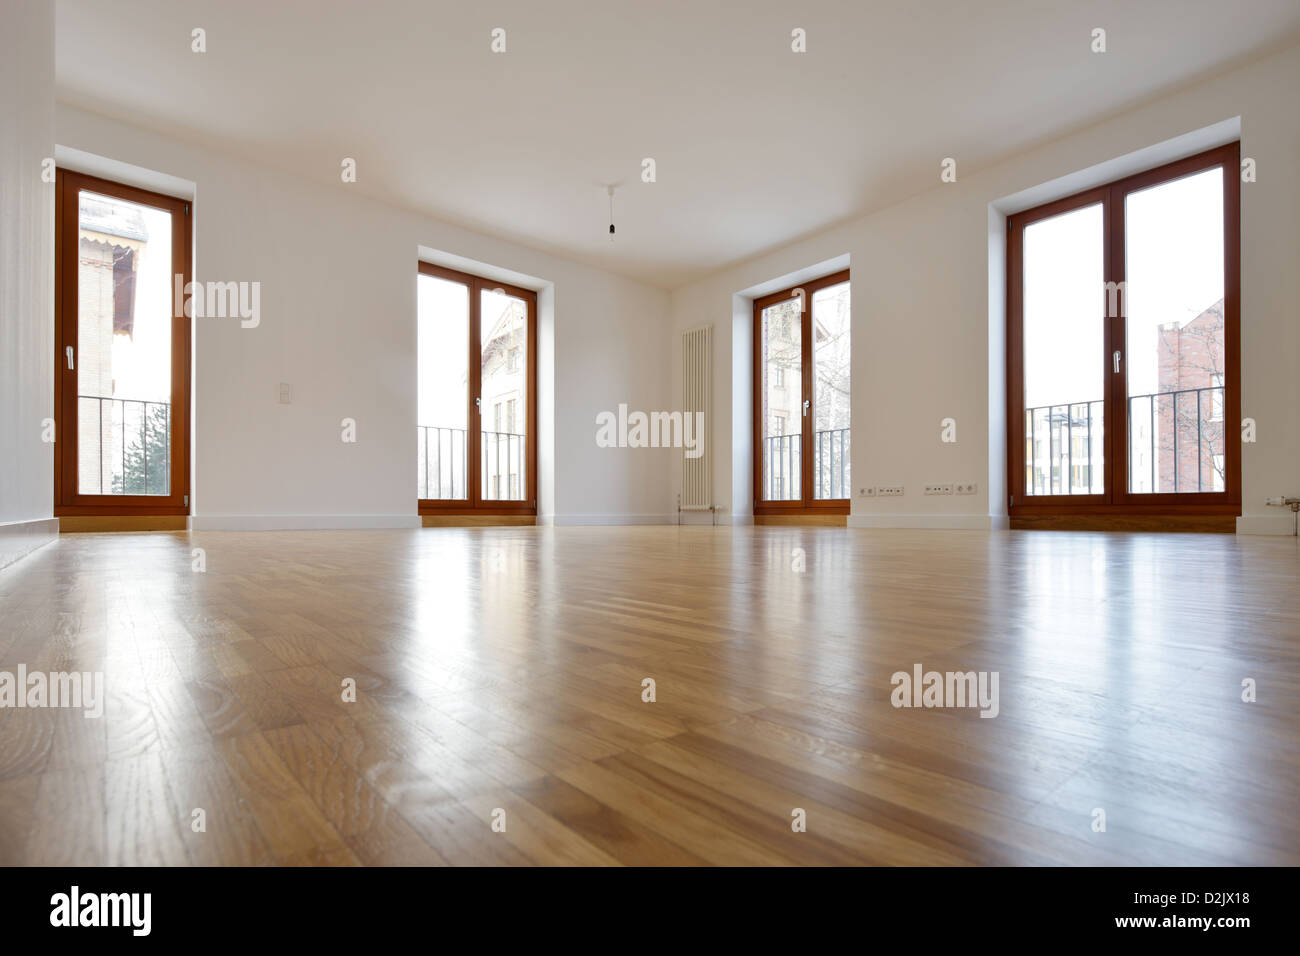 Berlin, Germany, rooms with wooden windows and hardwood floors Stock Photo